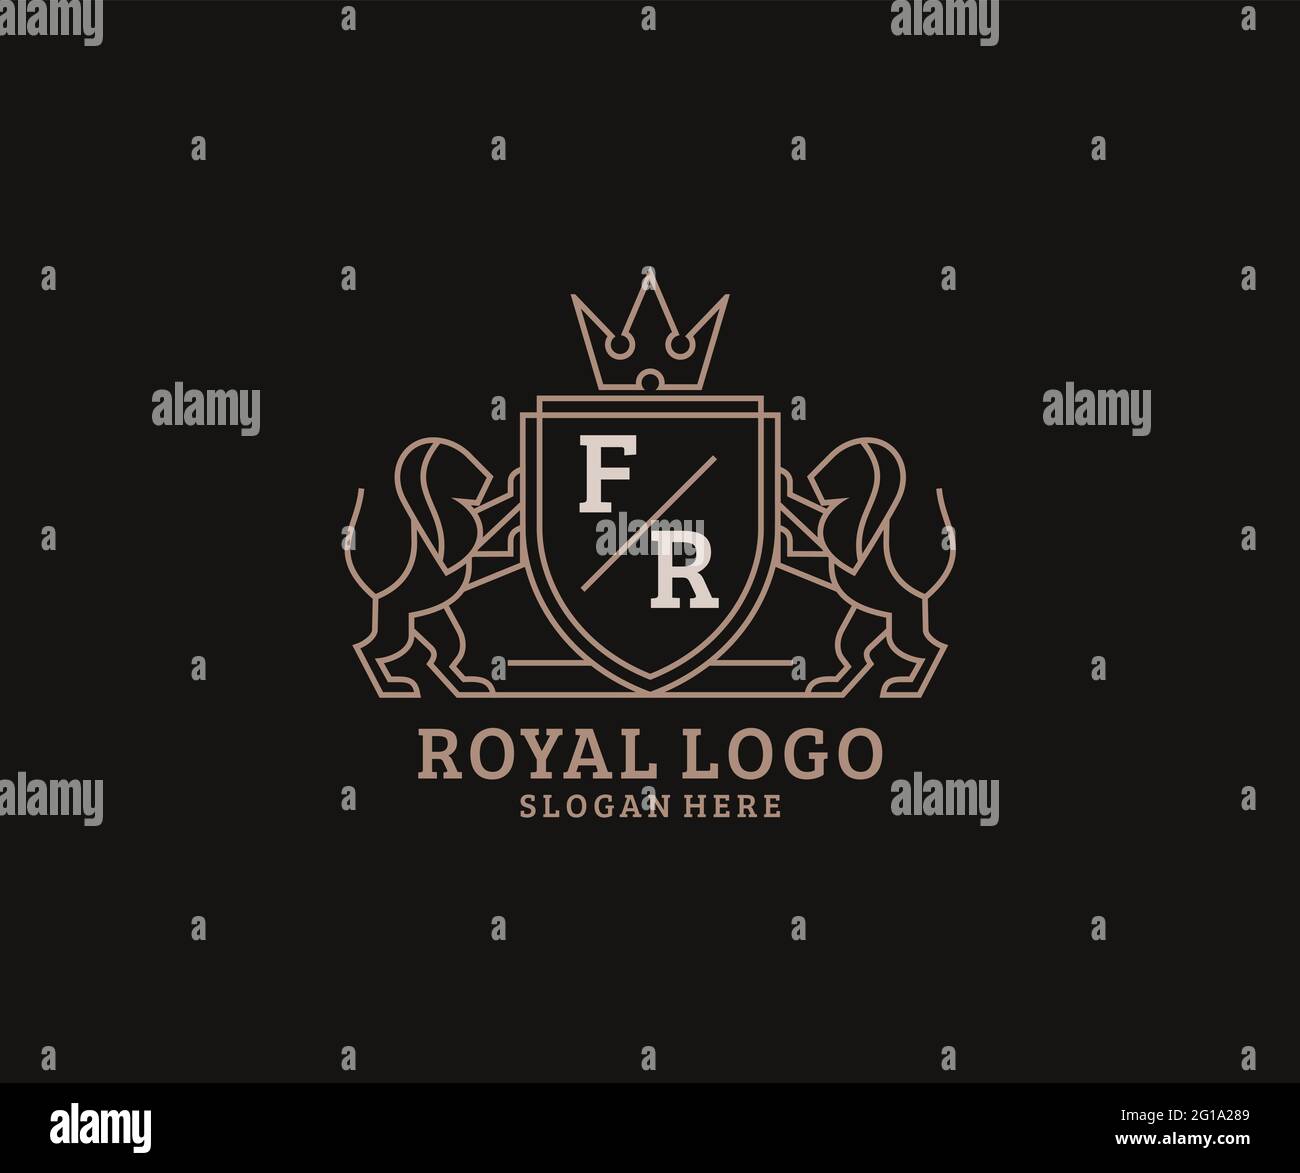 FR Letter Lion Royal Luxury Logo template in vector art for Restaurant, Royalty, Boutique, Cafe, Hotel, Heraldic, Jewelry, Fashion and other vector il Stock Vector